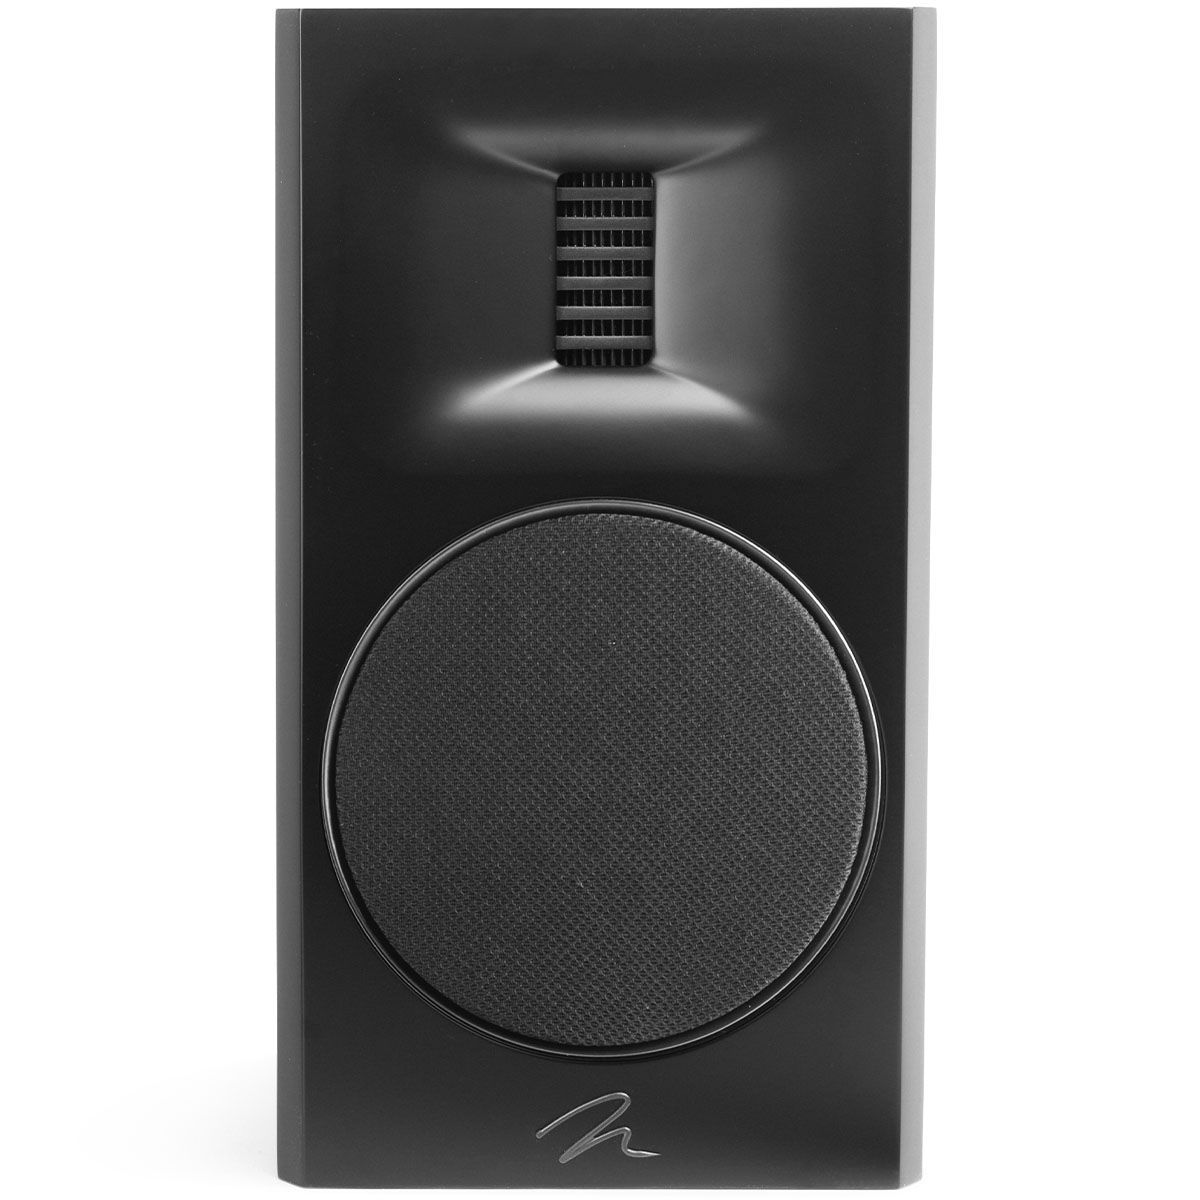 MartinLogan Motion XT B100 Bookshelf Speaker in black, front view with grilles on white background